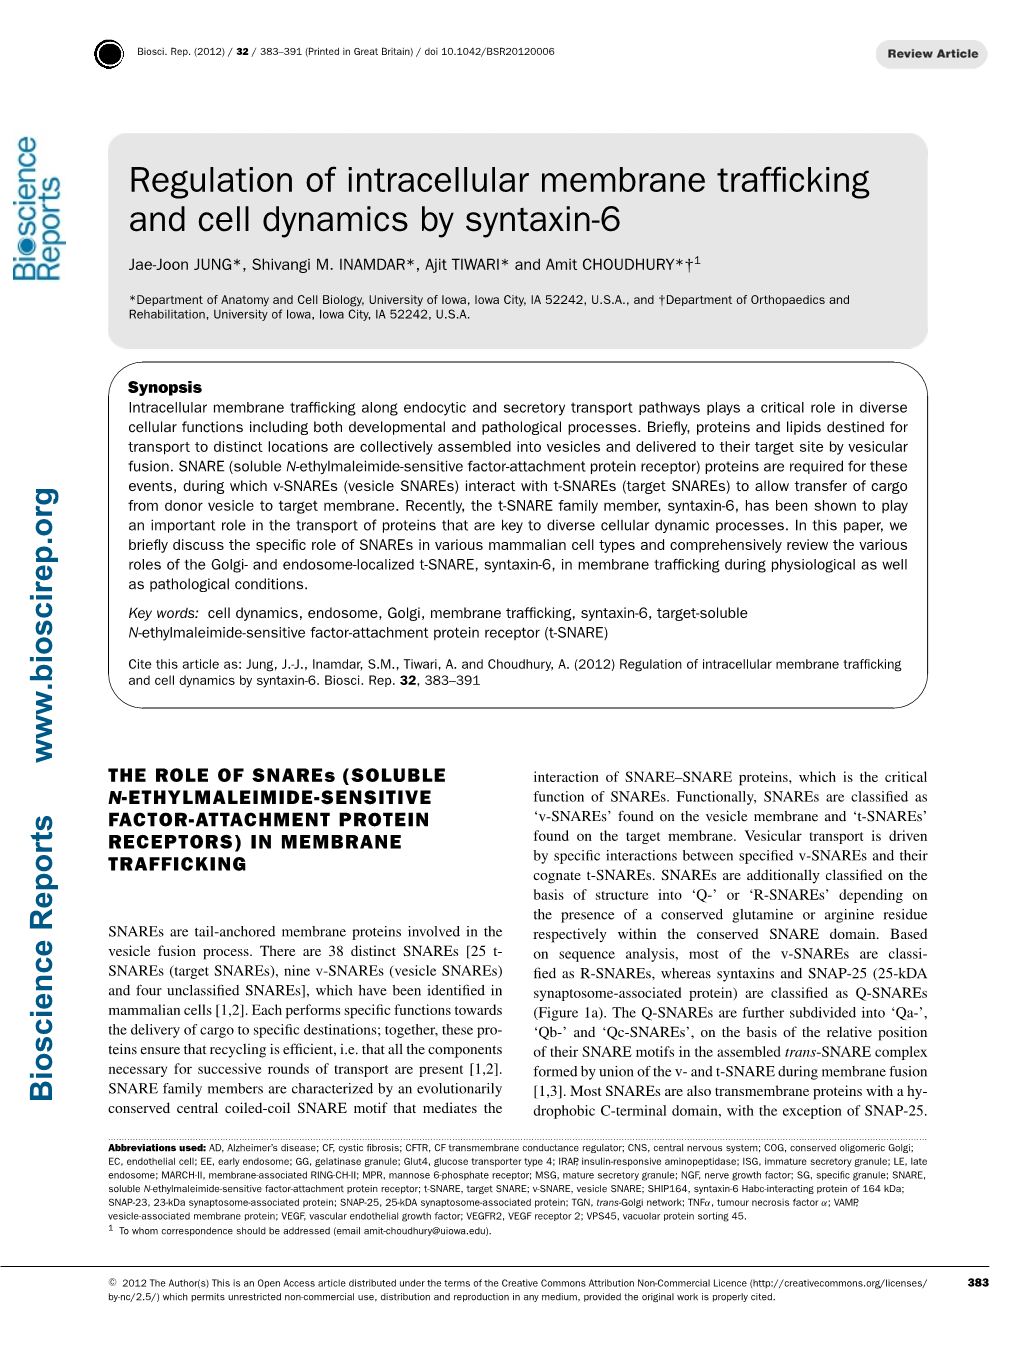 Regulation of Intracellular Membrane Trafficking and Cell Dynamics By